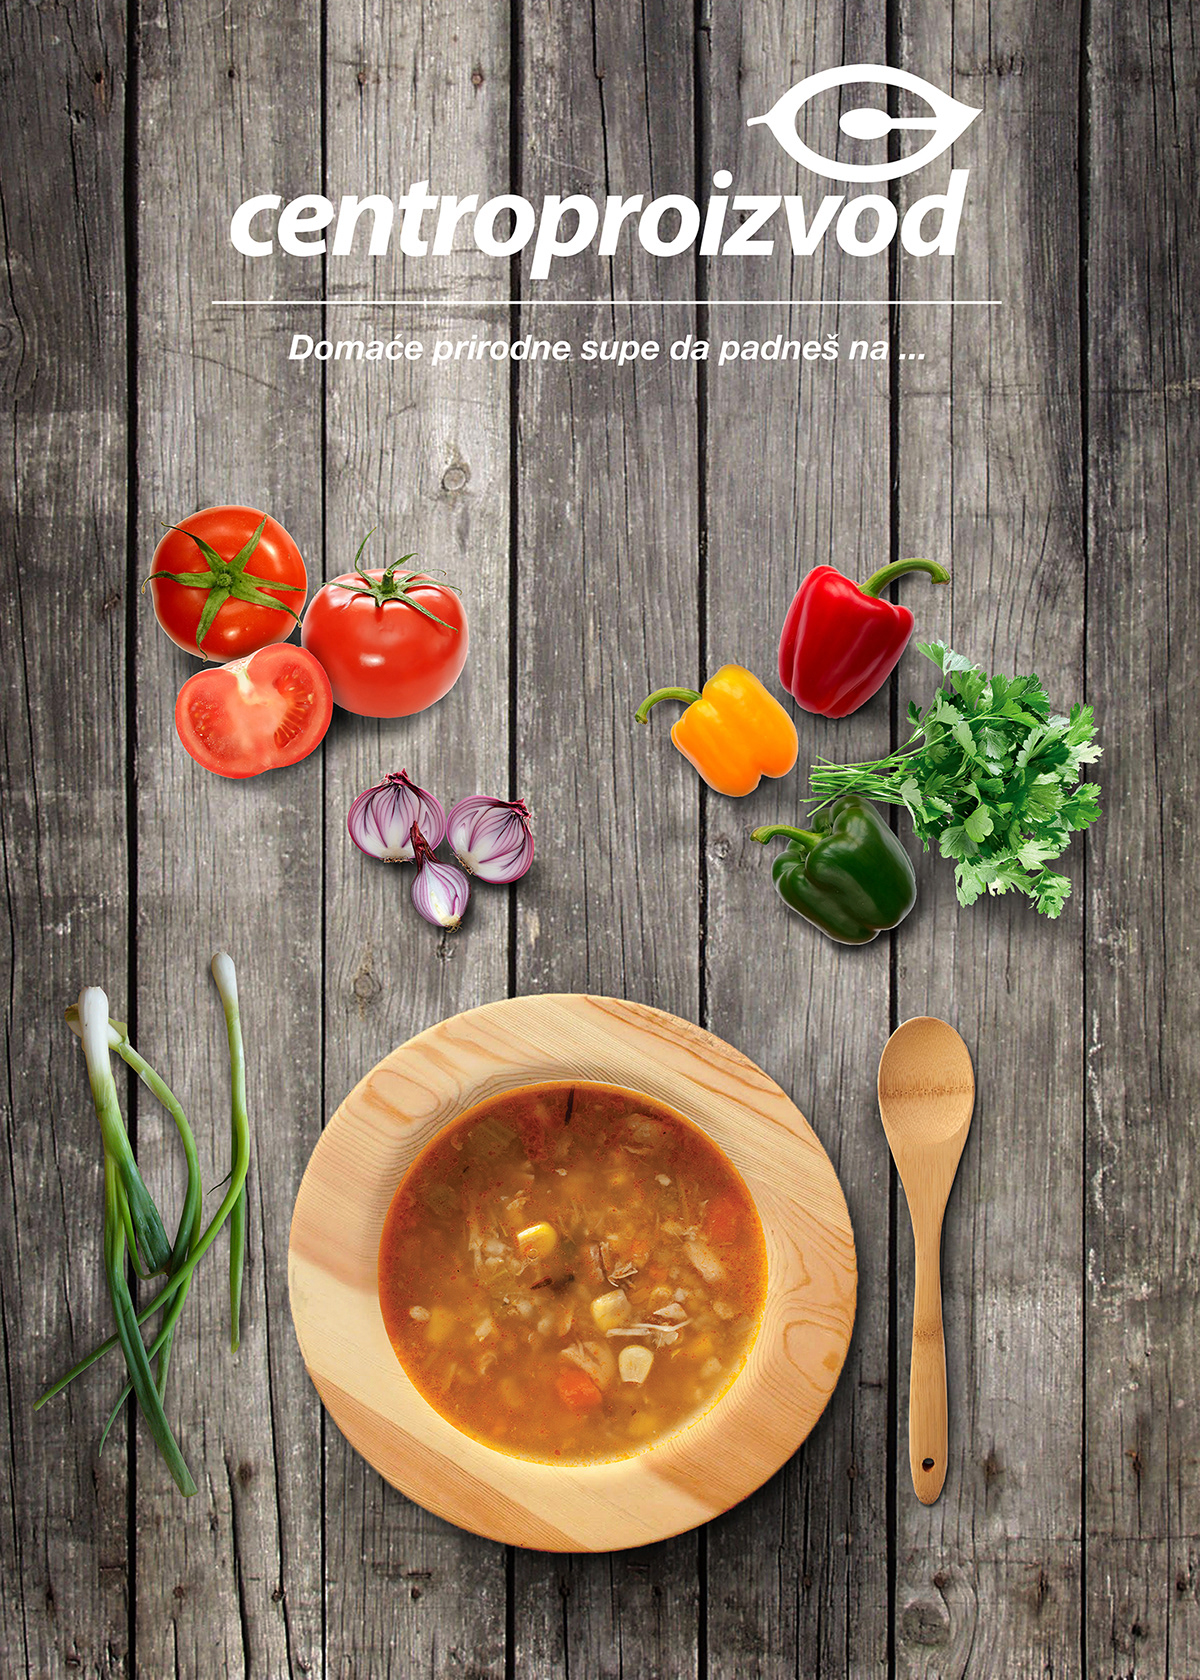 healthy healthy food centro proizvod c supe Soup poster design Poster Design commercial promo poster